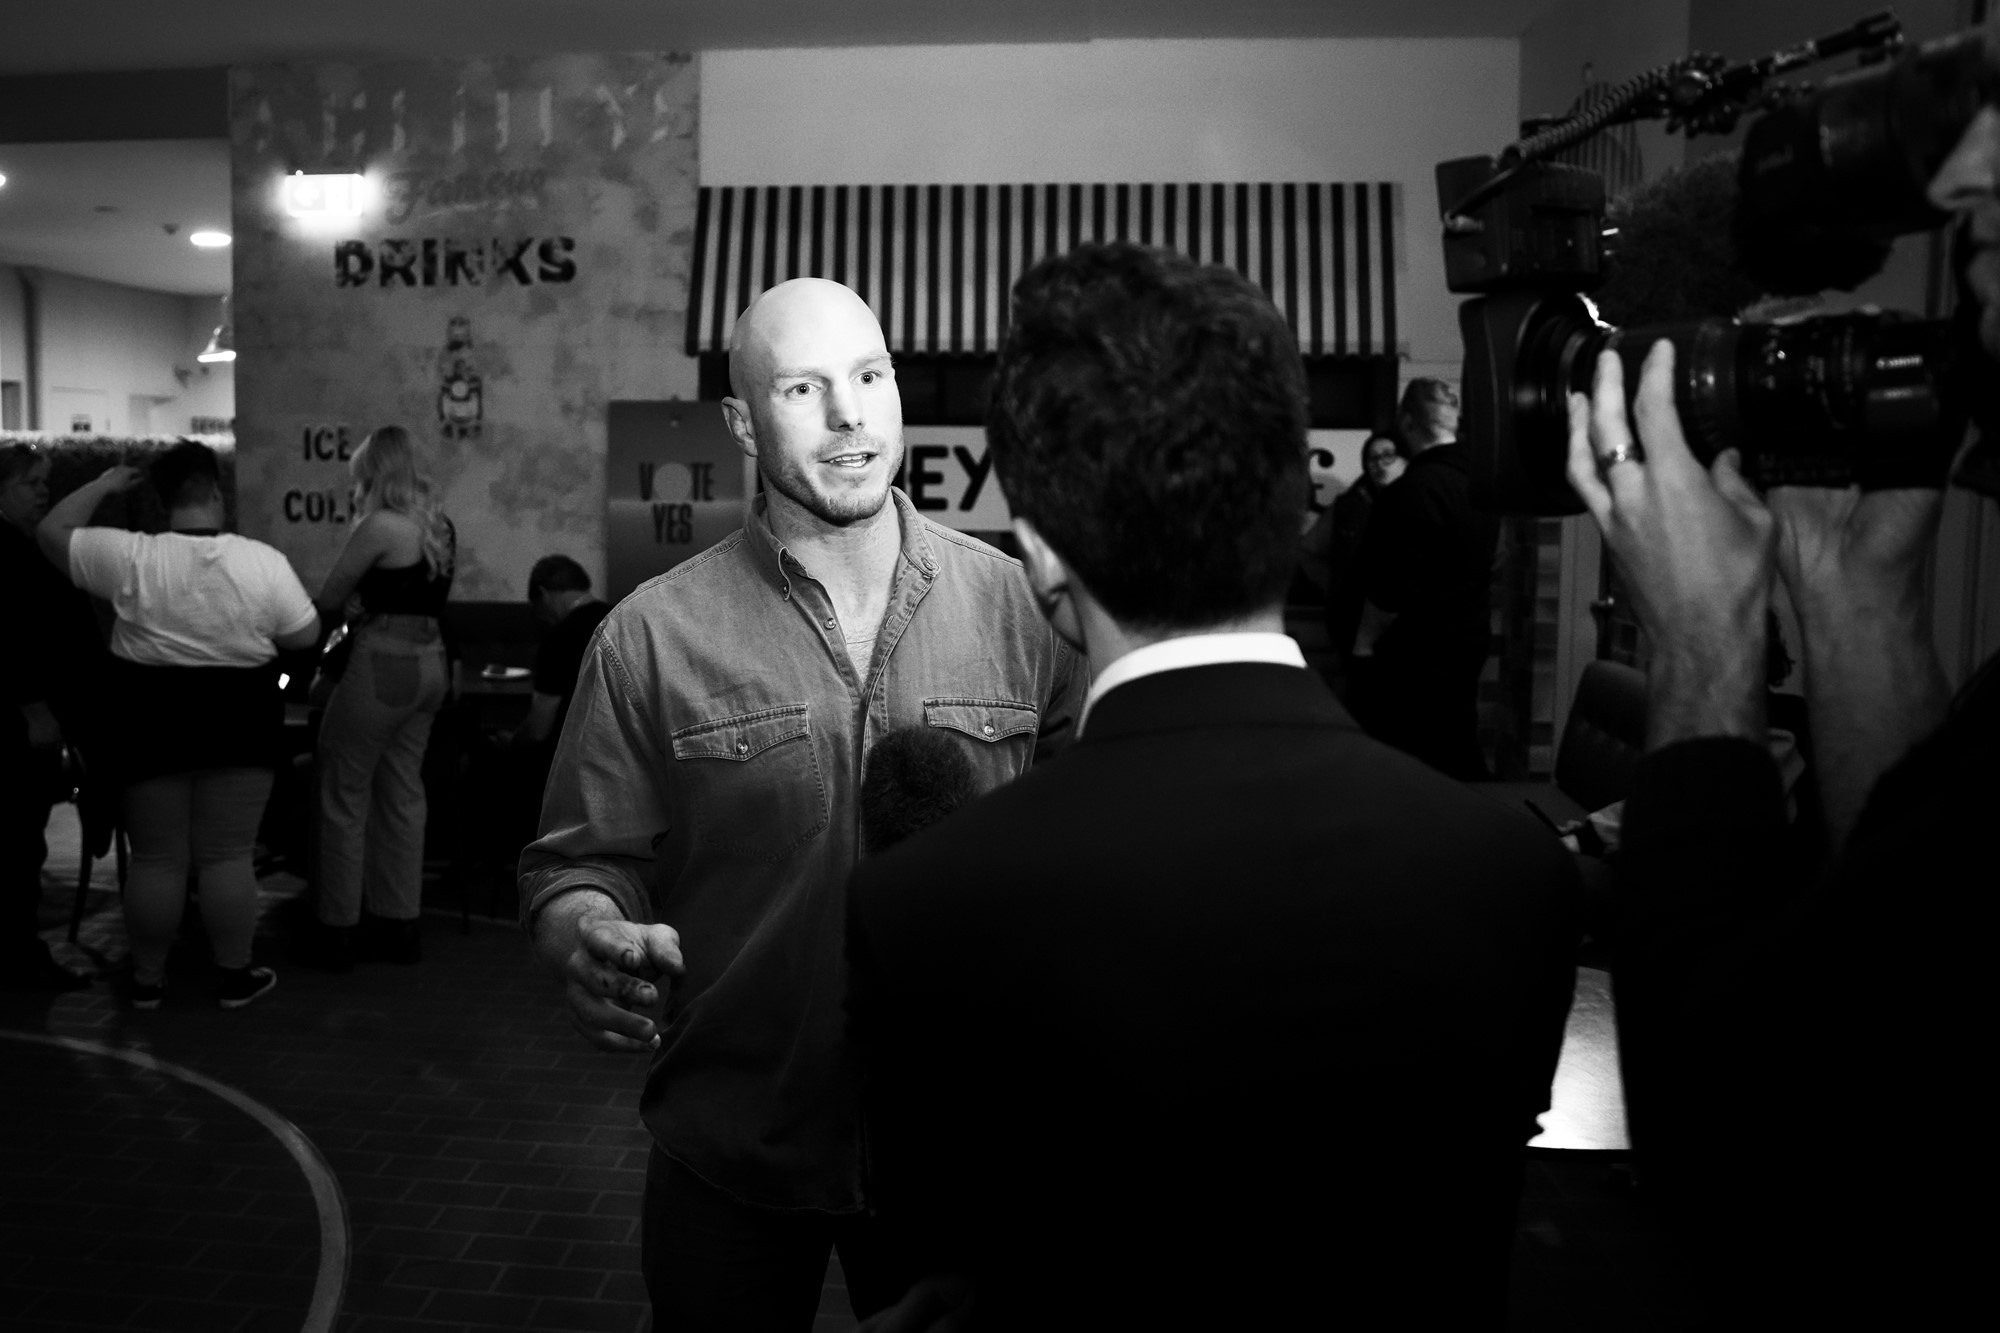 A black and white photo of David speaking to a reporter.